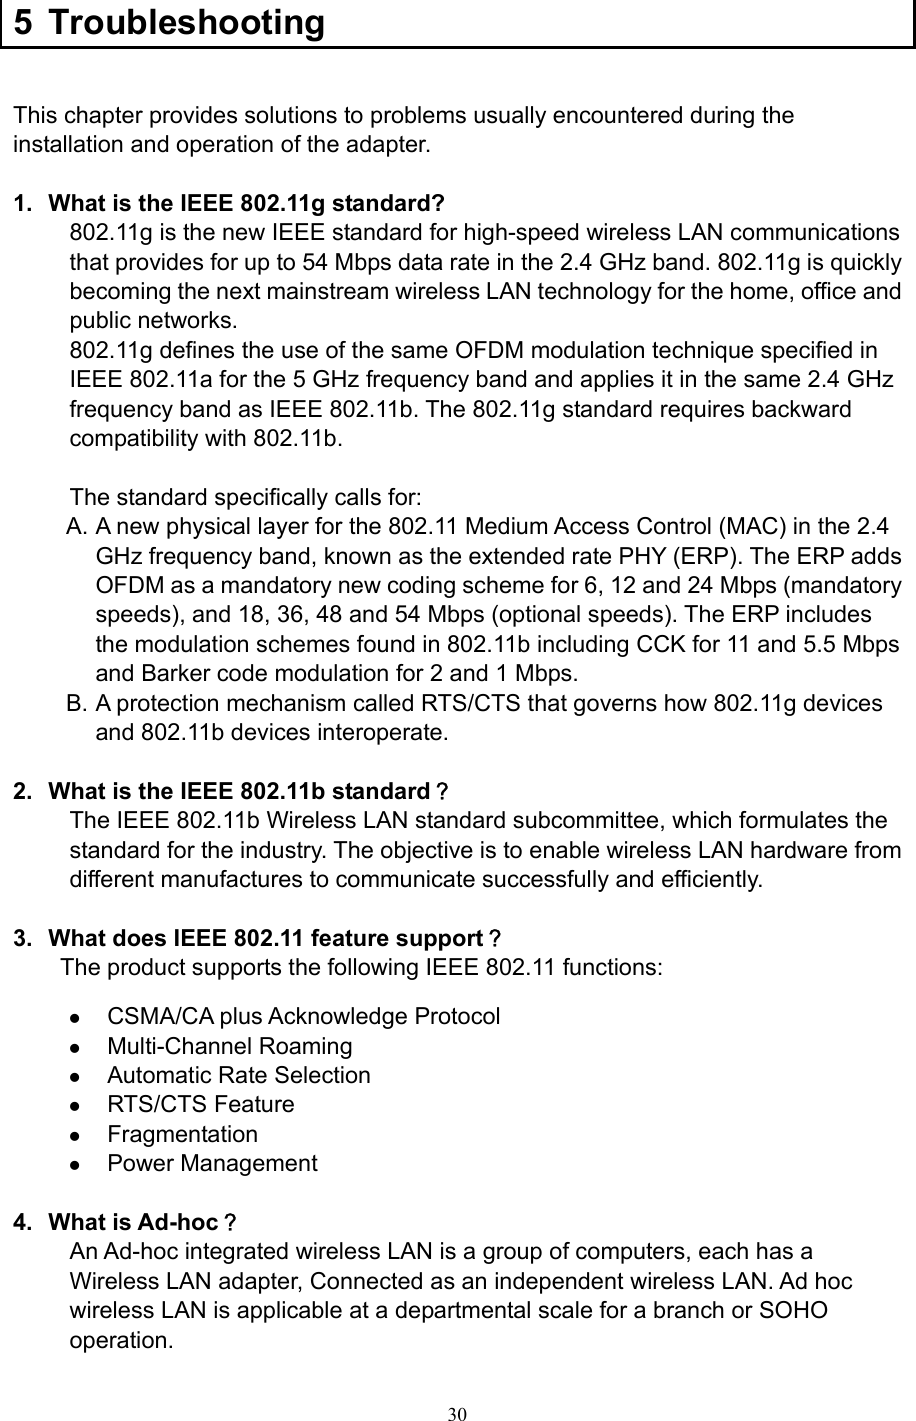  30 5 Troubleshooting  This chapter provides solutions to problems usually encountered during the installation and operation of the adapter.    1.  What is the IEEE 802.11g standard? 802.11g is the new IEEE standard for high-speed wireless LAN communications that provides for up to 54 Mbps data rate in the 2.4 GHz band. 802.11g is quickly becoming the next mainstream wireless LAN technology for the home, office and public networks.   802.11g defines the use of the same OFDM modulation technique specified in IEEE 802.11a for the 5 GHz frequency band and applies it in the same 2.4 GHz frequency band as IEEE 802.11b. The 802.11g standard requires backward compatibility with 802.11b.  The standard specifically calls for:   A. A new physical layer for the 802.11 Medium Access Control (MAC) in the 2.4 GHz frequency band, known as the extended rate PHY (ERP). The ERP adds OFDM as a mandatory new coding scheme for 6, 12 and 24 Mbps (mandatory speeds), and 18, 36, 48 and 54 Mbps (optional speeds). The ERP includes the modulation schemes found in 802.11b including CCK for 11 and 5.5 Mbps and Barker code modulation for 2 and 1 Mbps. B. A protection mechanism called RTS/CTS that governs how 802.11g devices and 802.11b devices interoperate.  2.  What is the IEEE 802.11b standard？ The IEEE 802.11b Wireless LAN standard subcommittee, which formulates the standard for the industry. The objective is to enable wireless LAN hardware from different manufactures to communicate successfully and efficiently.  3.  What does IEEE 802.11 feature support？ The product supports the following IEEE 802.11 functions: z CSMA/CA plus Acknowledge Protocol z Multi-Channel Roaming z Automatic Rate Selection z RTS/CTS Feature z Fragmentation z Power Management  4. What is Ad-hoc？ An Ad-hoc integrated wireless LAN is a group of computers, each has a Wireless LAN adapter, Connected as an independent wireless LAN. Ad hoc wireless LAN is applicable at a departmental scale for a branch or SOHO operation.  